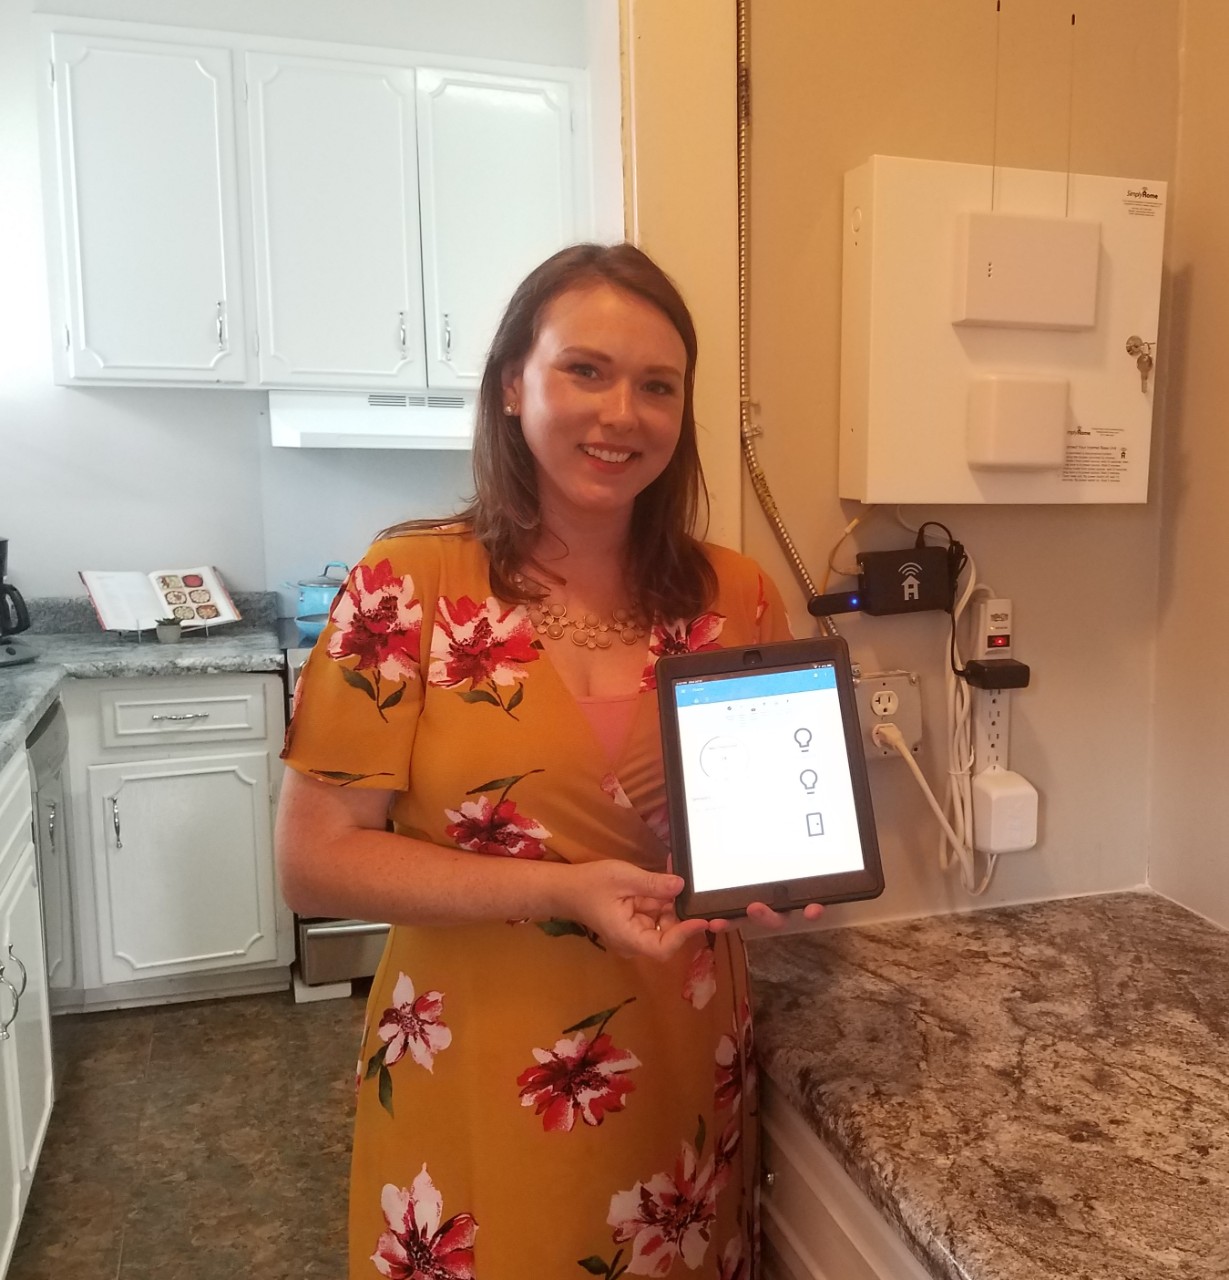 Kate Adams, a young woman in a gold floral dress, stands in the kitchen of the technology model home described in this article and holds up an ipad showing an open app